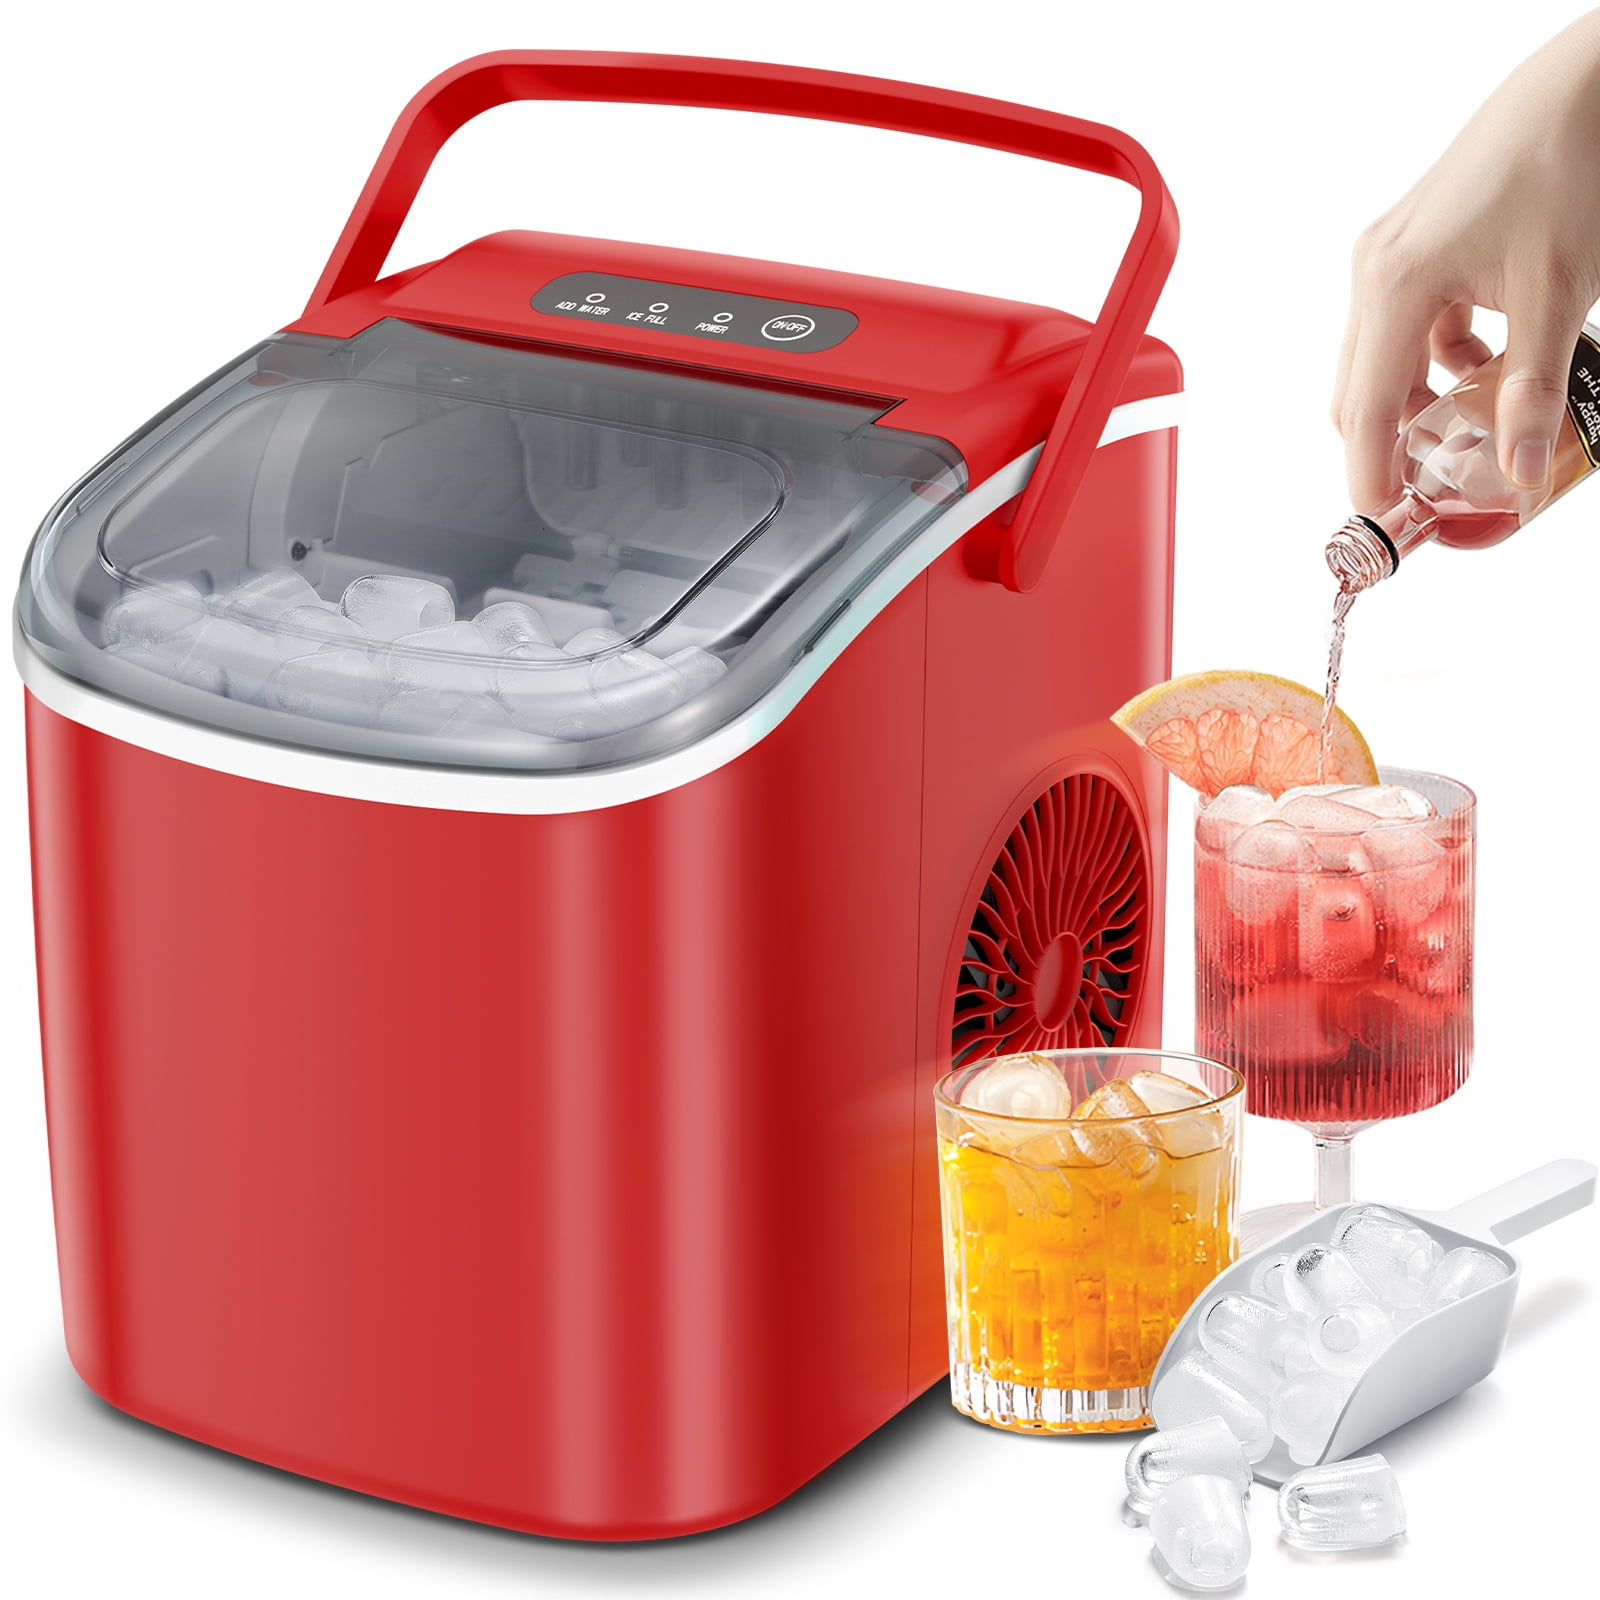 Kismile Counter top Ice Maker Machine, 9 Cubes Ready in 6-8 Minutes,  Portable Ice Cube Maker with Scoop and Basket for HomeKitchenOfficeBar  (Red) – The Market Depot